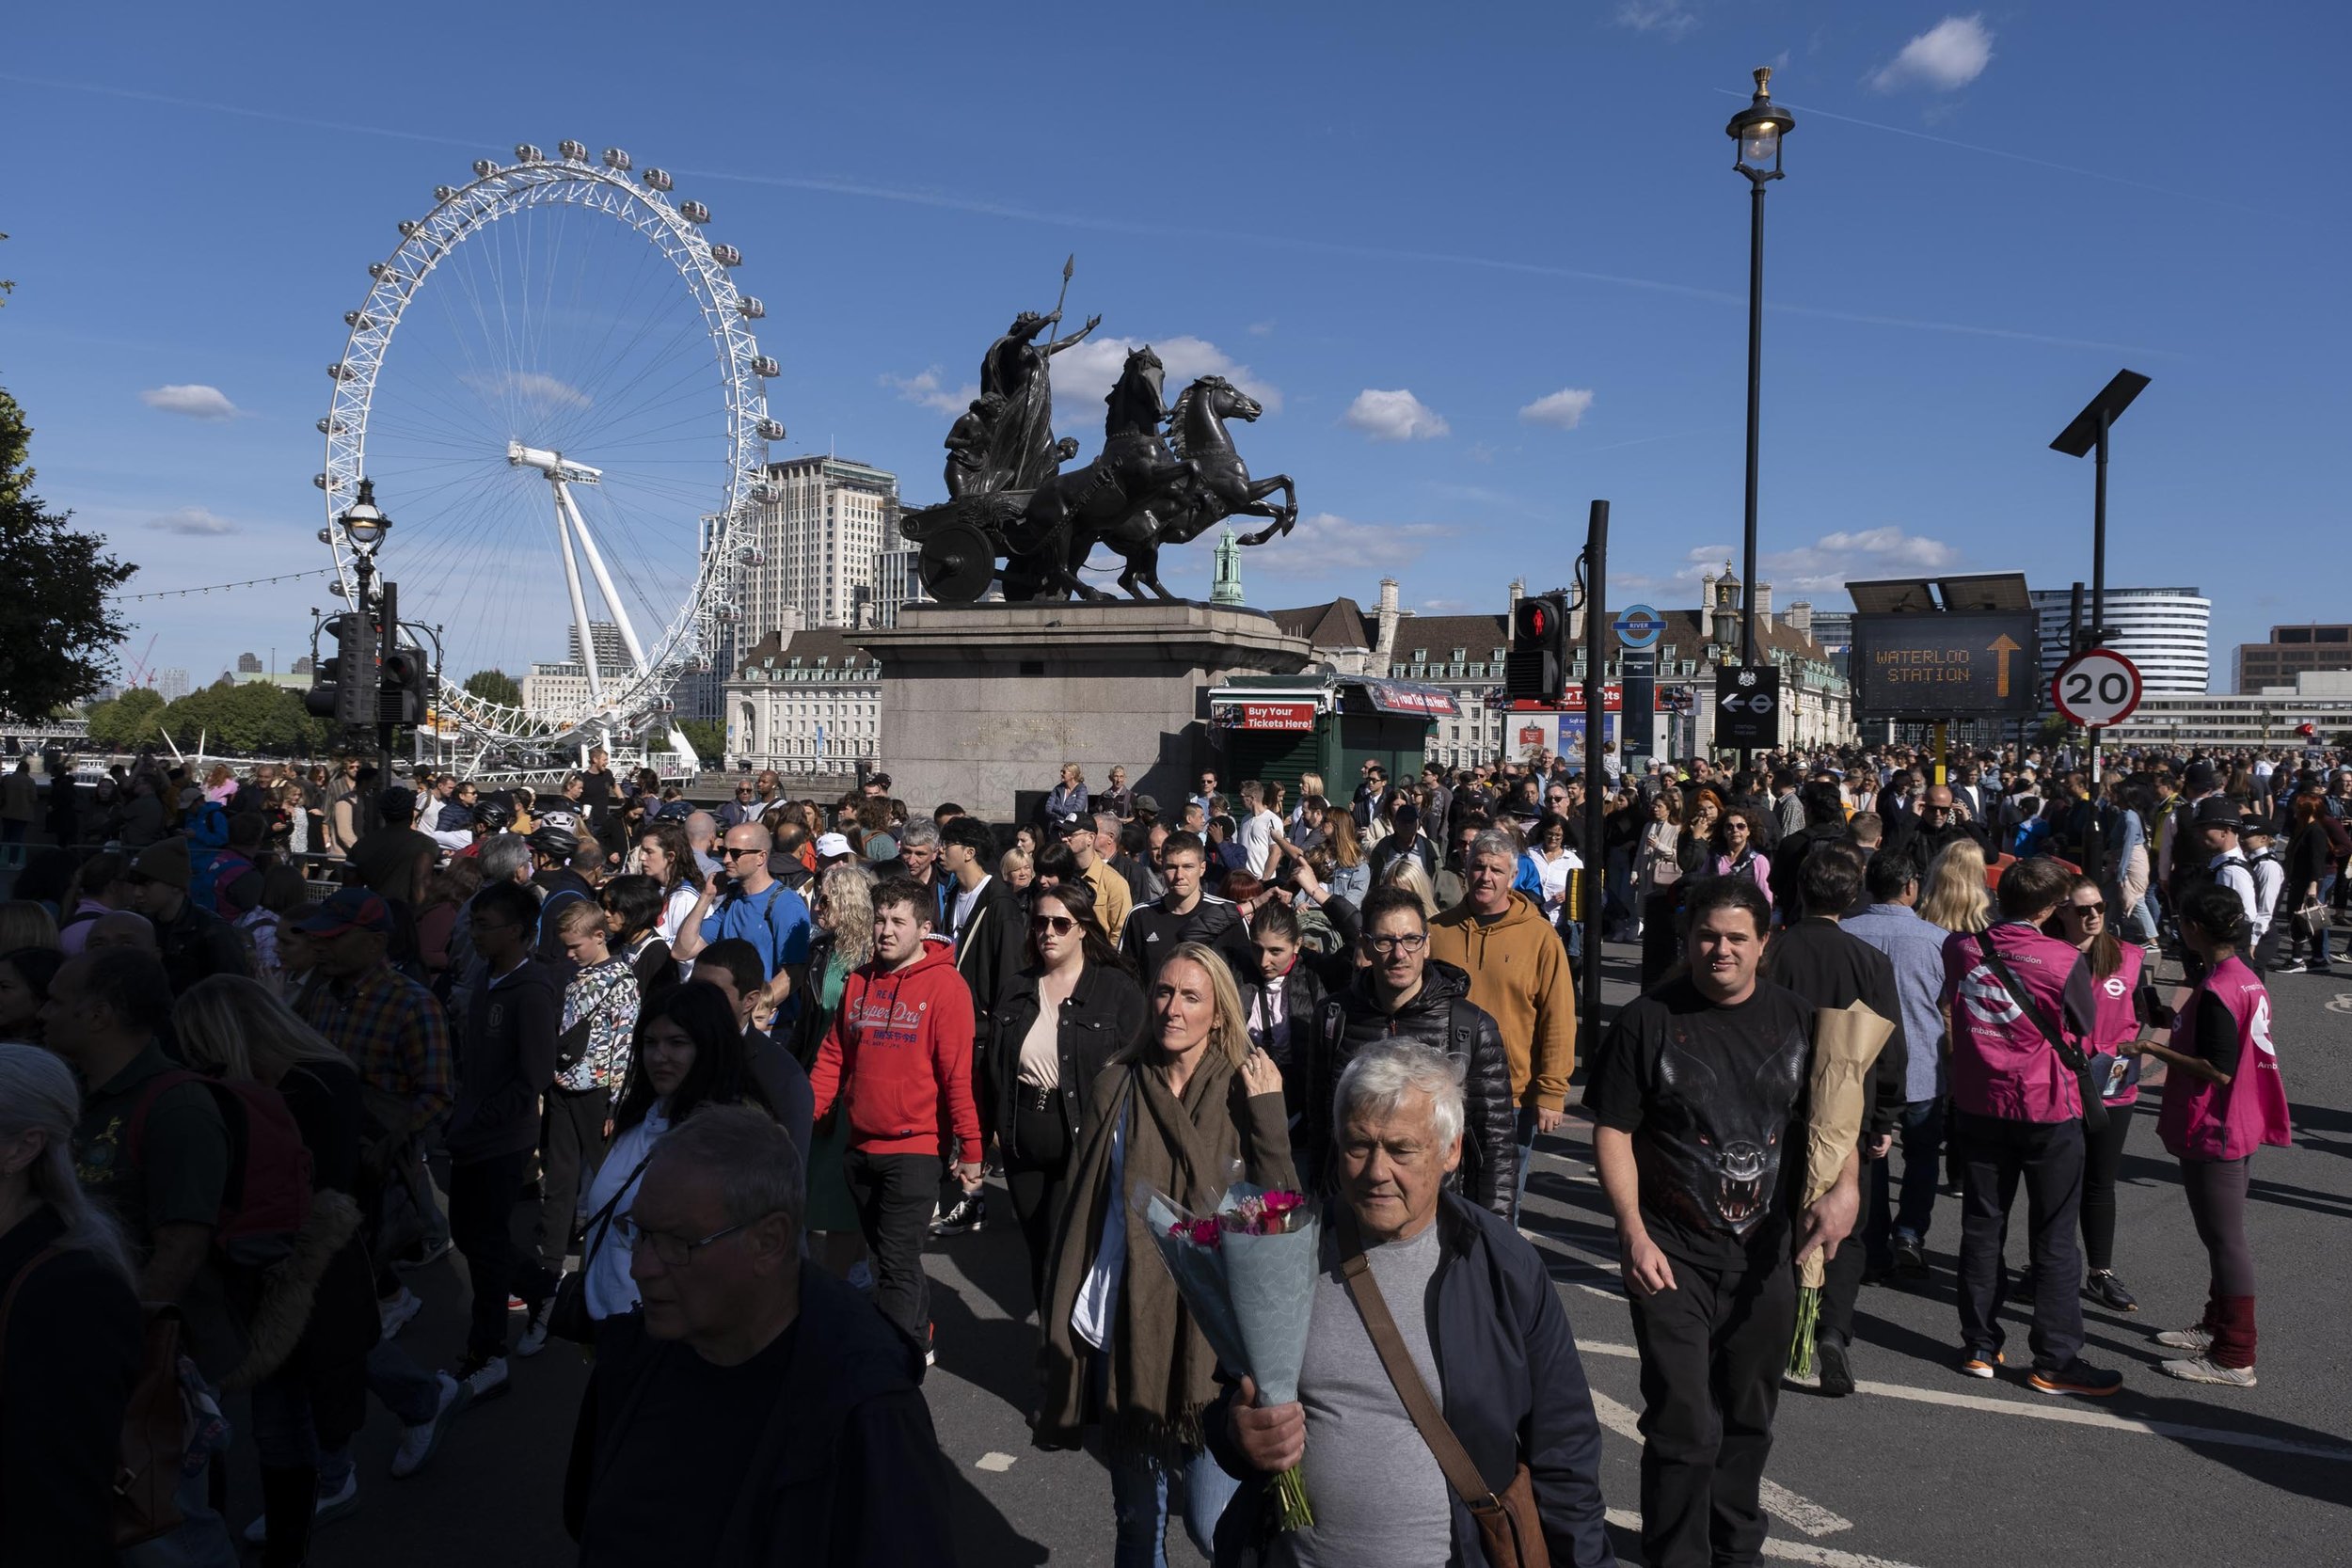  Unprecedented crowds come to London to experience history in the making. 